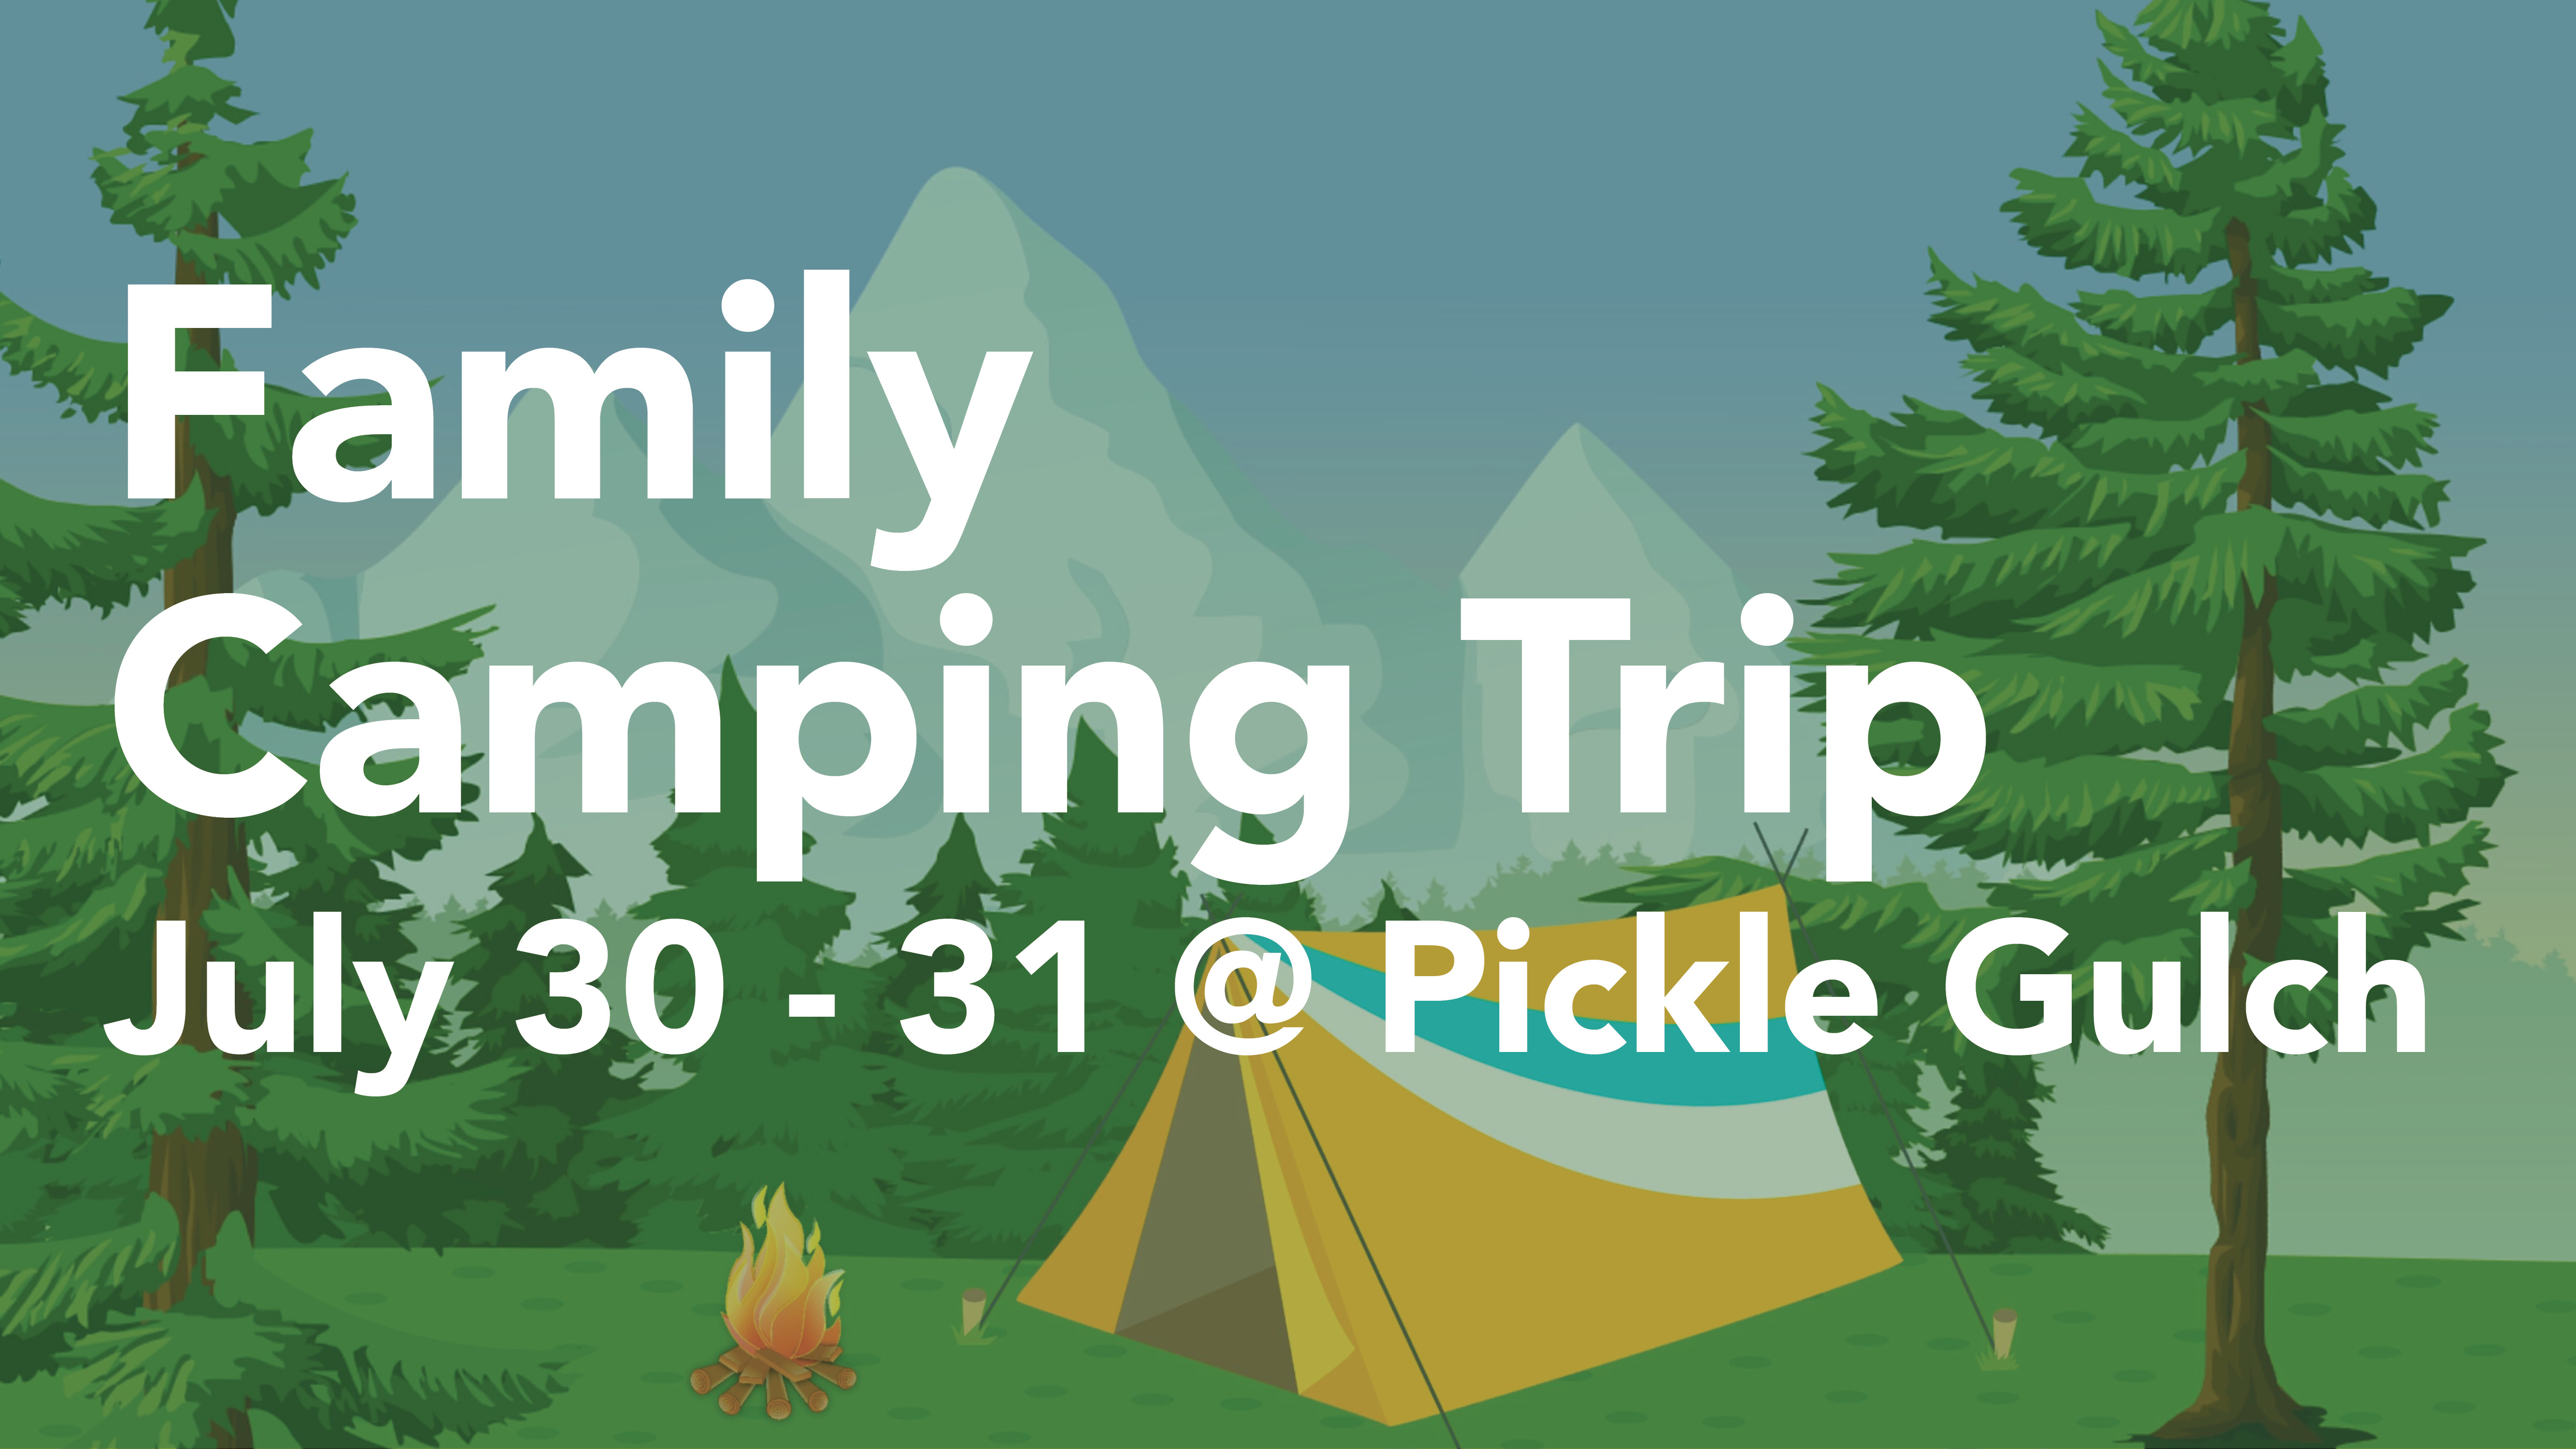 Announcement slide - Family Camping Trip